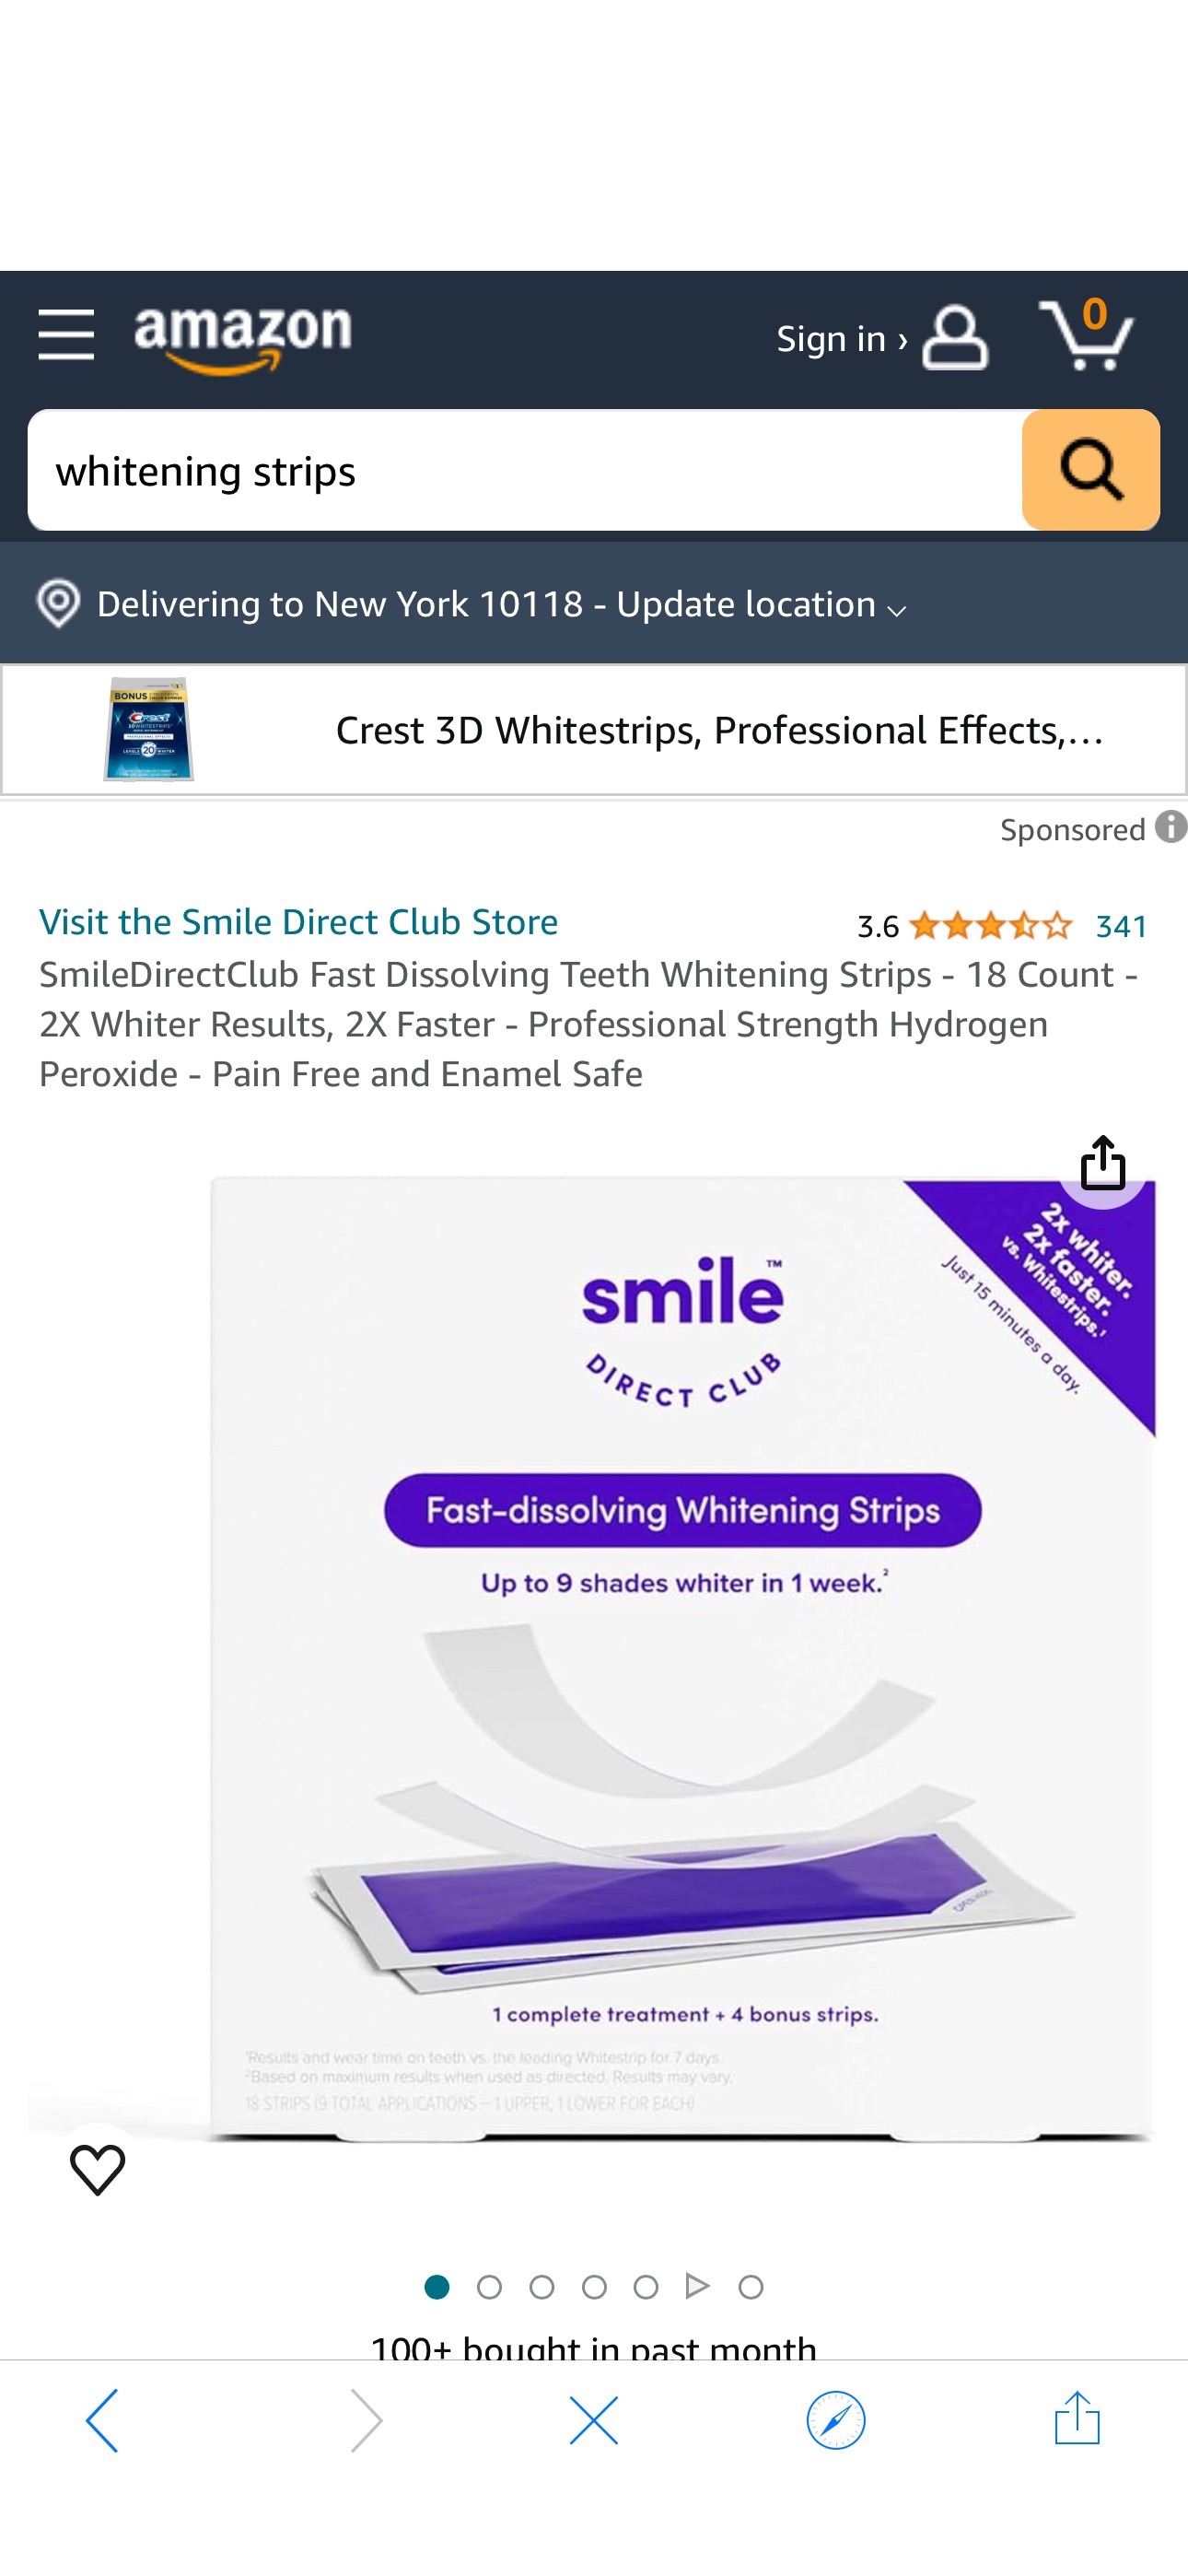 Amazon.com: SmileDirectClub Fast Dissolving Teeth Whitening Strips - 18 Count - 2X Whiter Results, 2X Faster - Professional Strength Hydrogen Peroxide - Pain Free and Enamel Safe : Health & Household